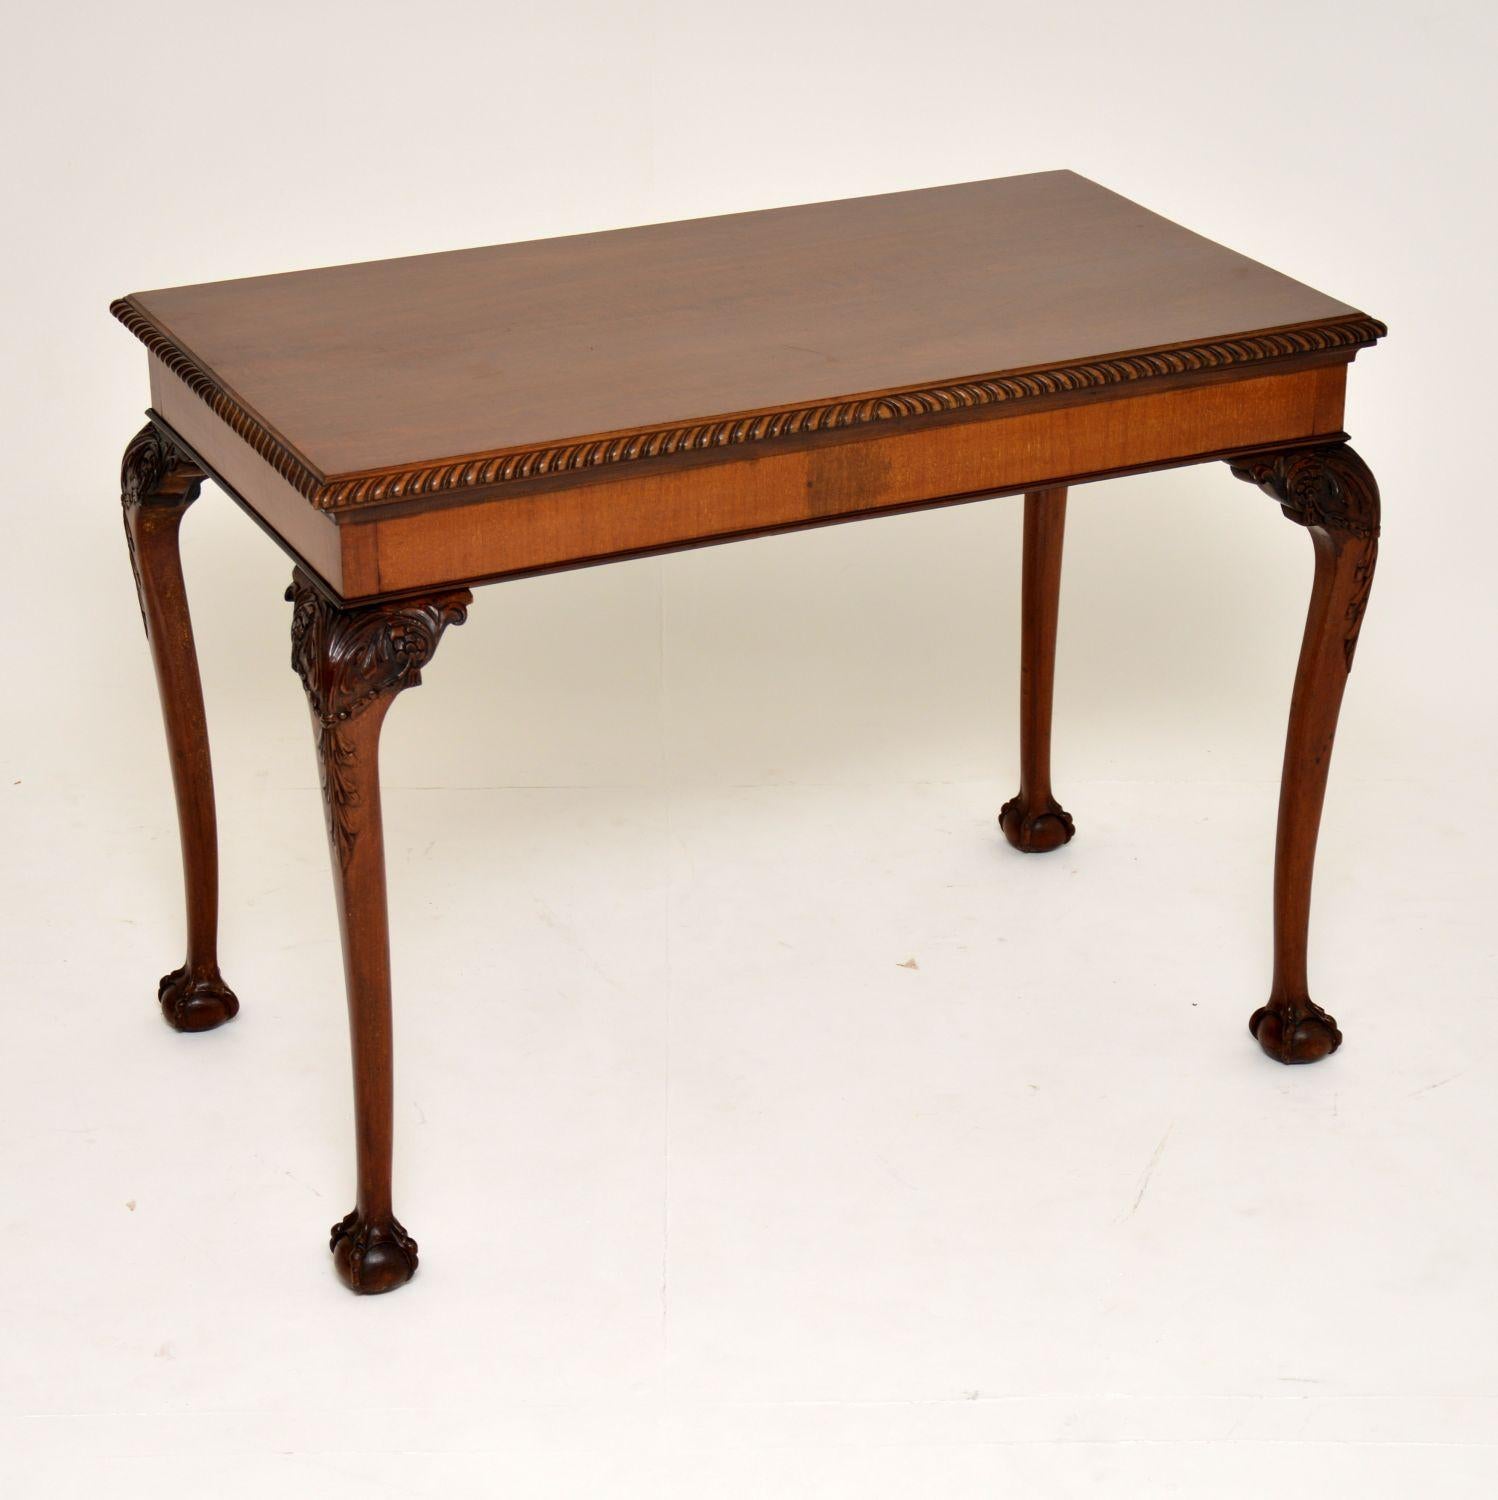 Antique mahogany Chippendale style writing table or side table, in excellent condition and dating to circa 1890-1910 period.

It has a carved gadrooned top edge and some fine carvings on the tops of the legs, which have well defined ball and claw